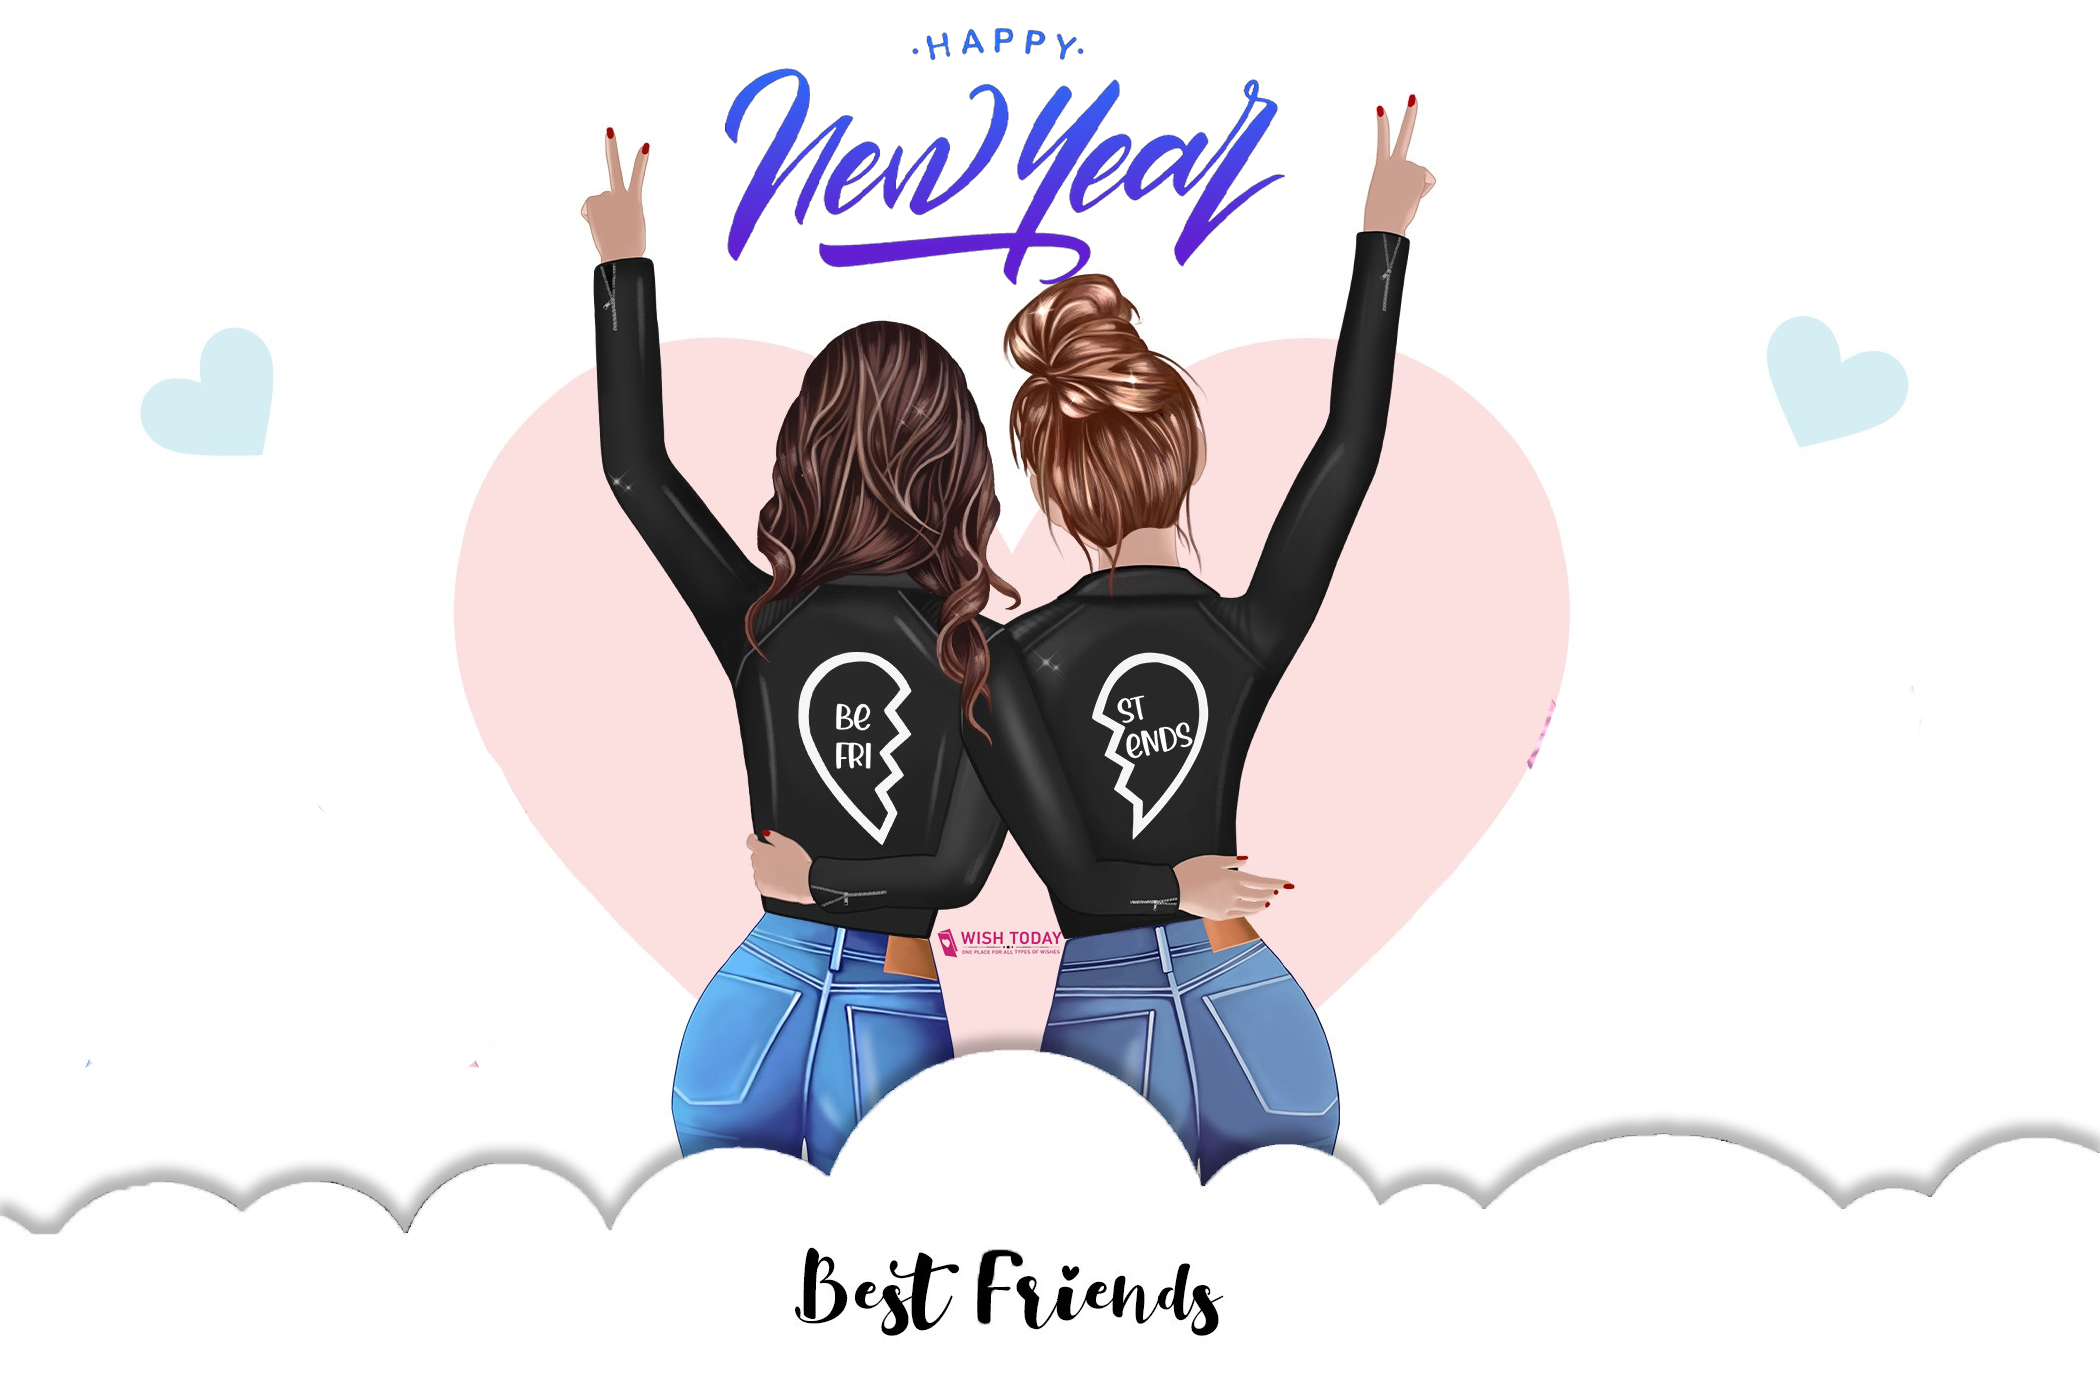 new year wish for best friend, happy new year wish for bestfriend, new year image for best friend, new year image for friend, happy new year images, happy new year 2022, 2022 new year, new year 2022, happy new year 2021 images, happy new year 2021 gif, new year 2021 images, happy new year gif, happy new year 2023 pic, happy new year images 2023, happy new year 2022 photo, happy new year 2022 wallpaper, happy new year 2022 images hd, happy new year photo, new year images, new year images 2022, 2022 new year images, happy new year pic, happy new year gif 2022, new year gif, happy new year pictur